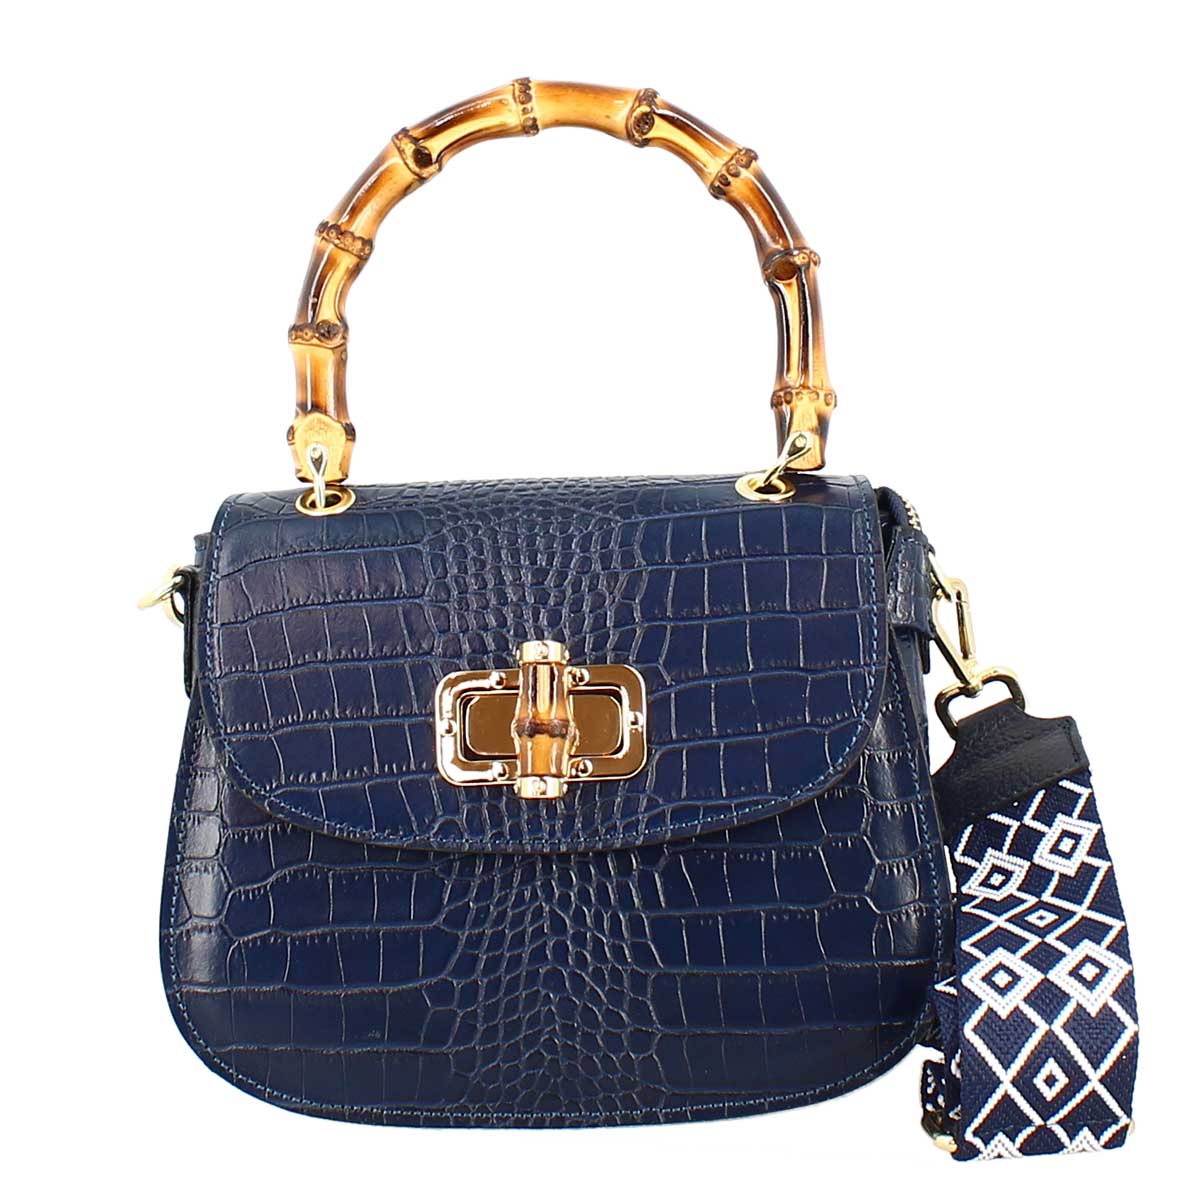 Handmade women's handbag in blue leather with removable shoulder strap